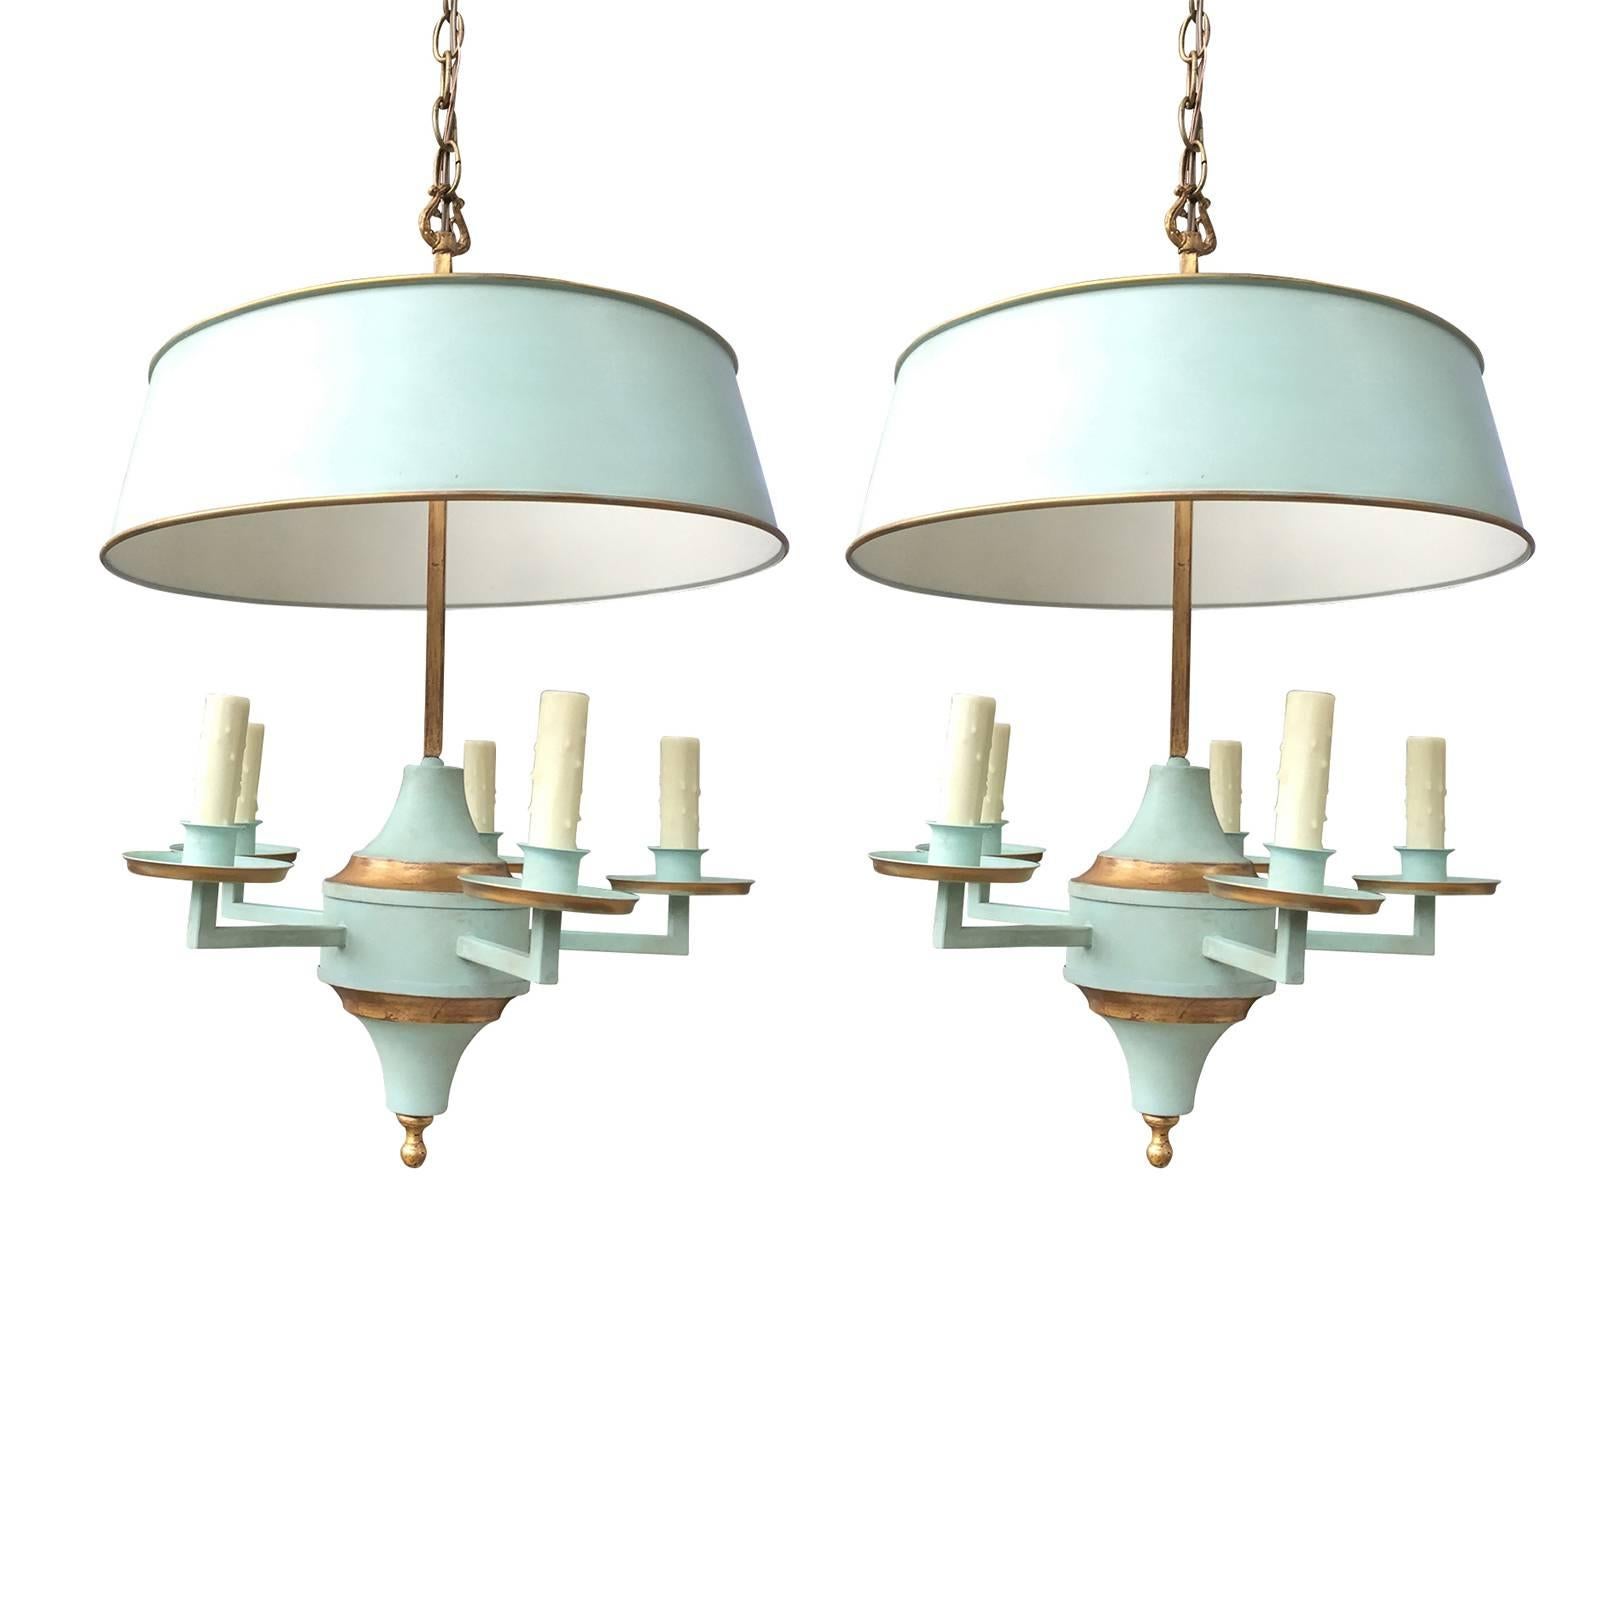 Pair of Hanging Bouillote Chandeliers, Probably Italian, circa 1950s